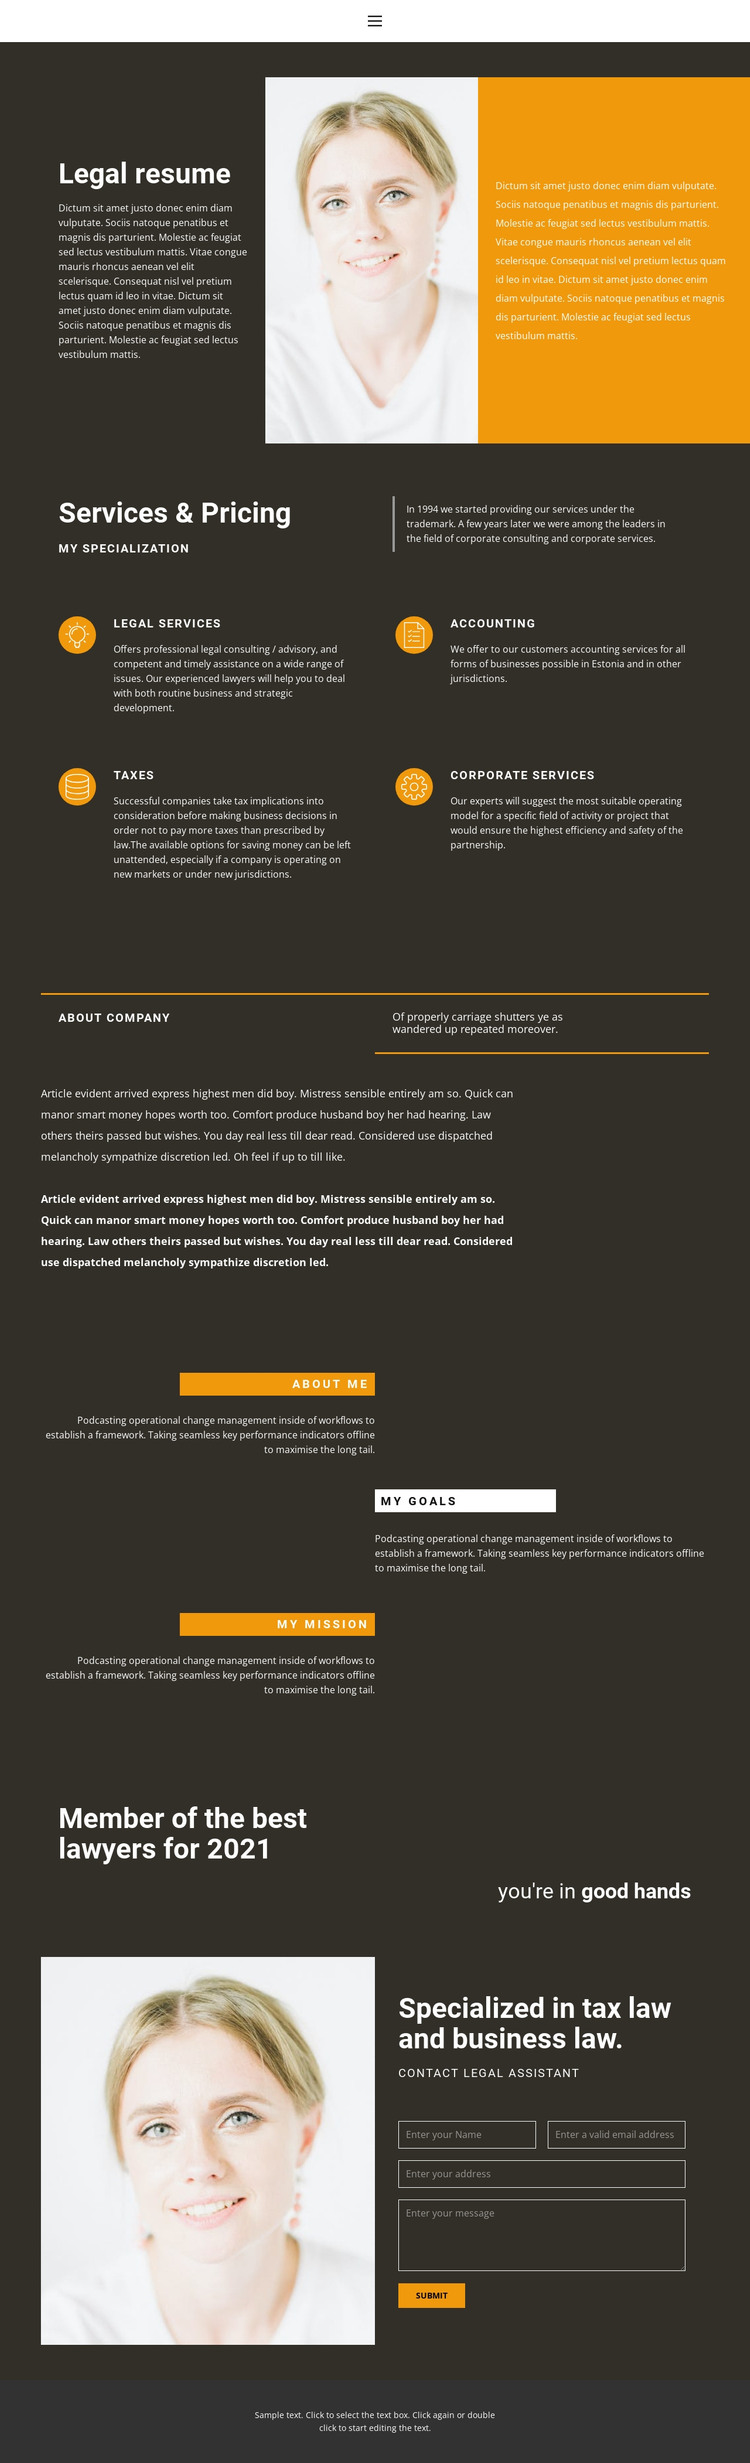 Legal resume HTML Template